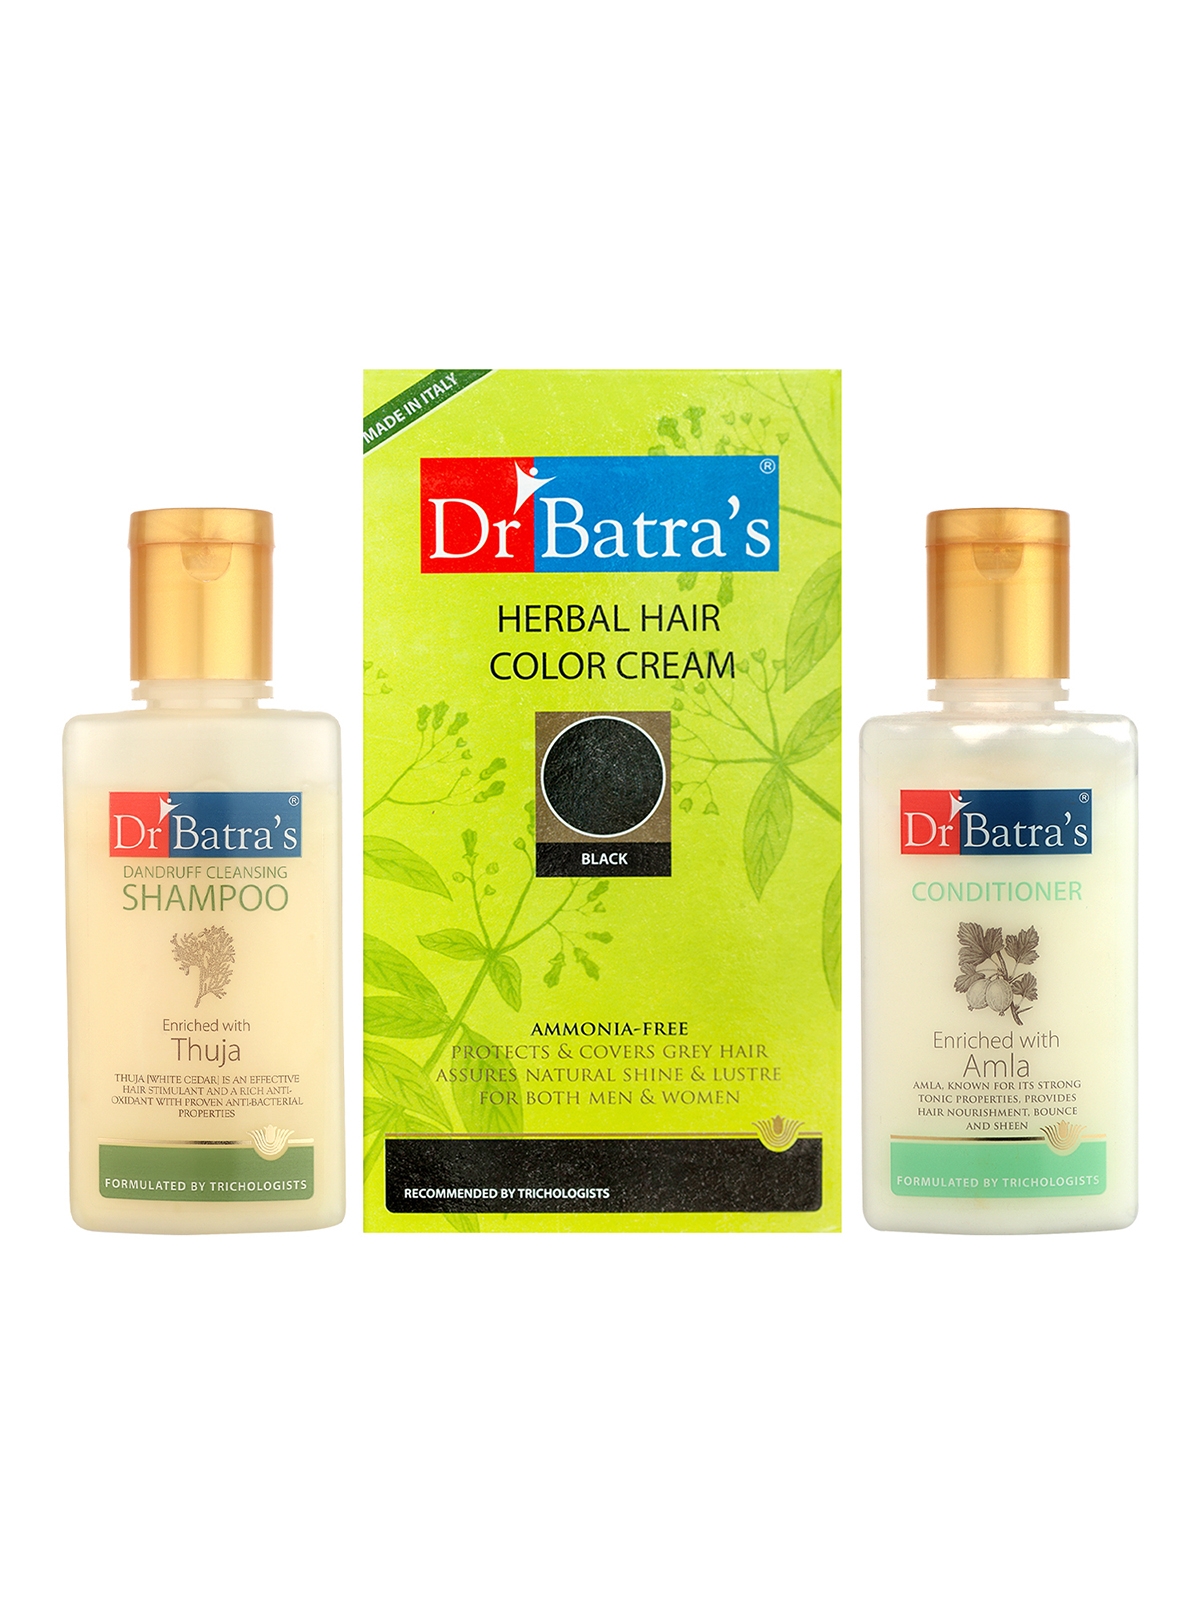 Dr Batra's | Dr Batra's Herbal Hair Color Cream-Black, Dandruff Cleansing Shampoo - 100 ml and Conditioner - 100 ml ( Pack of 3 Men and Women)